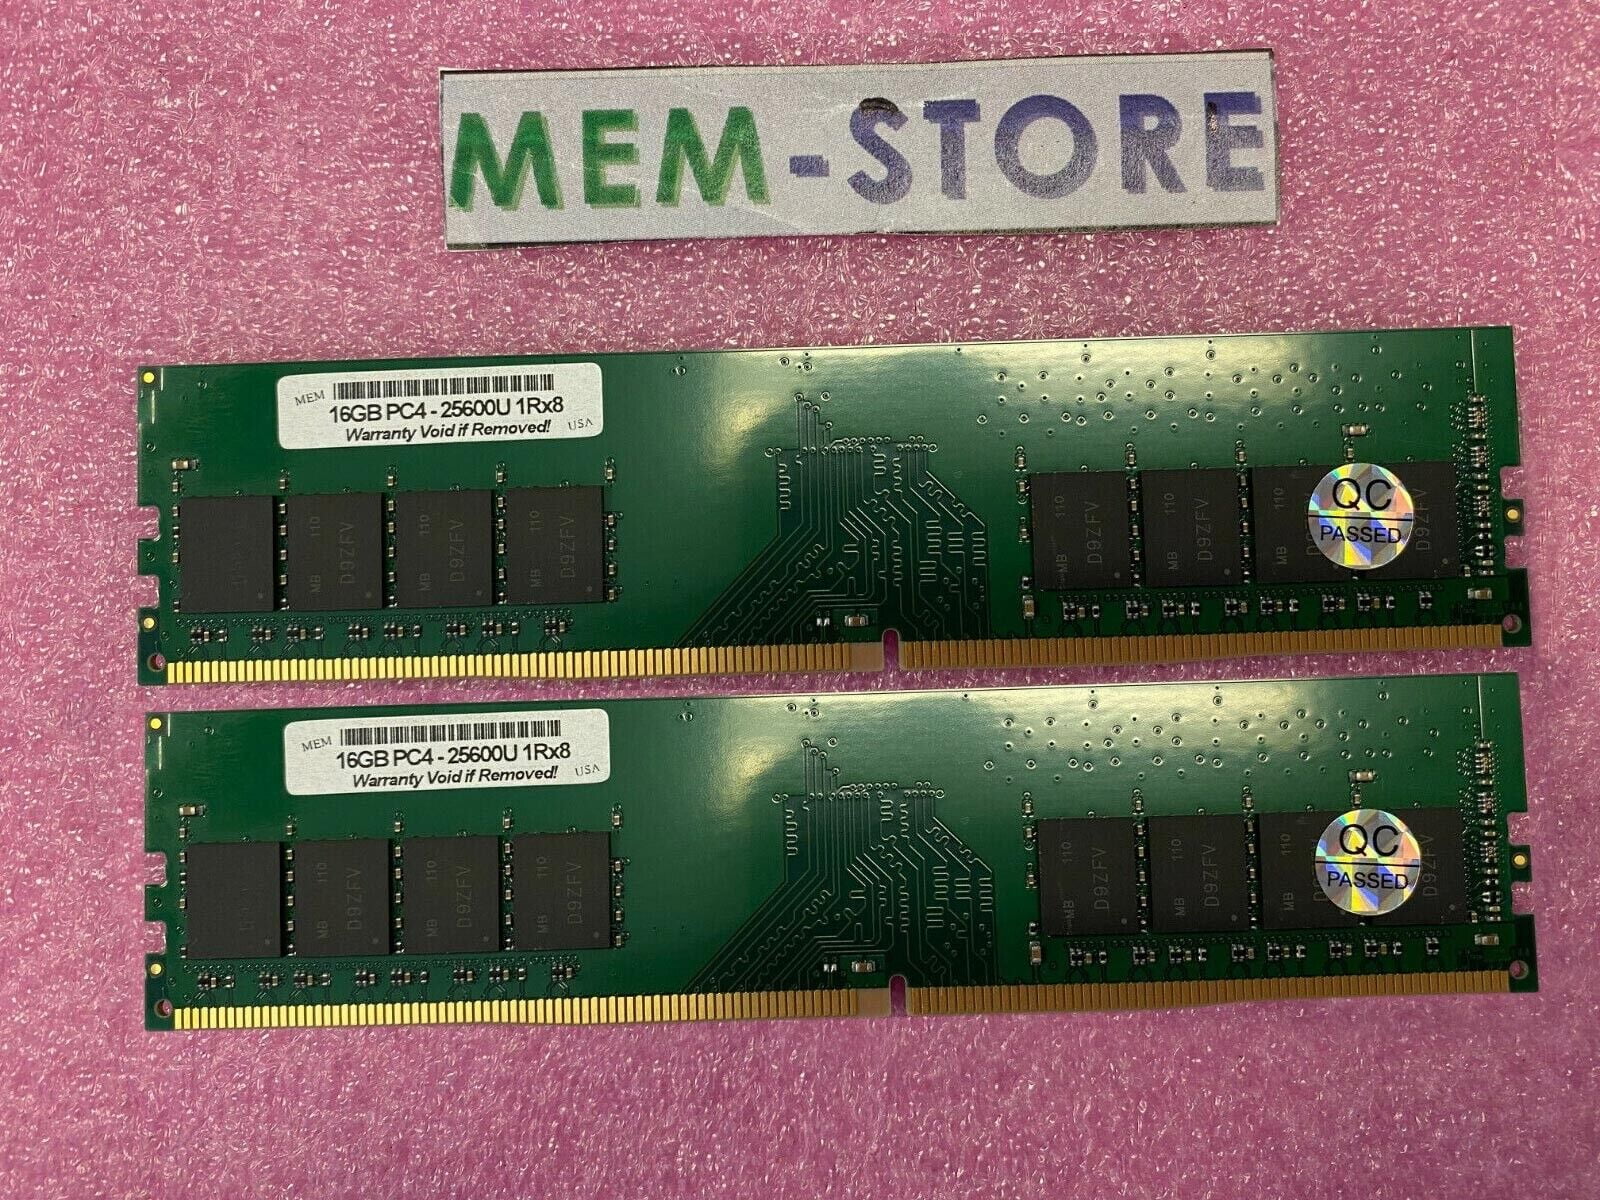 32GB (2x16GB) DDR4 3200MHz UDIMM Crucial Pro CP2K16G4DFRA32A Equivalent  Memory (3rd Party) 